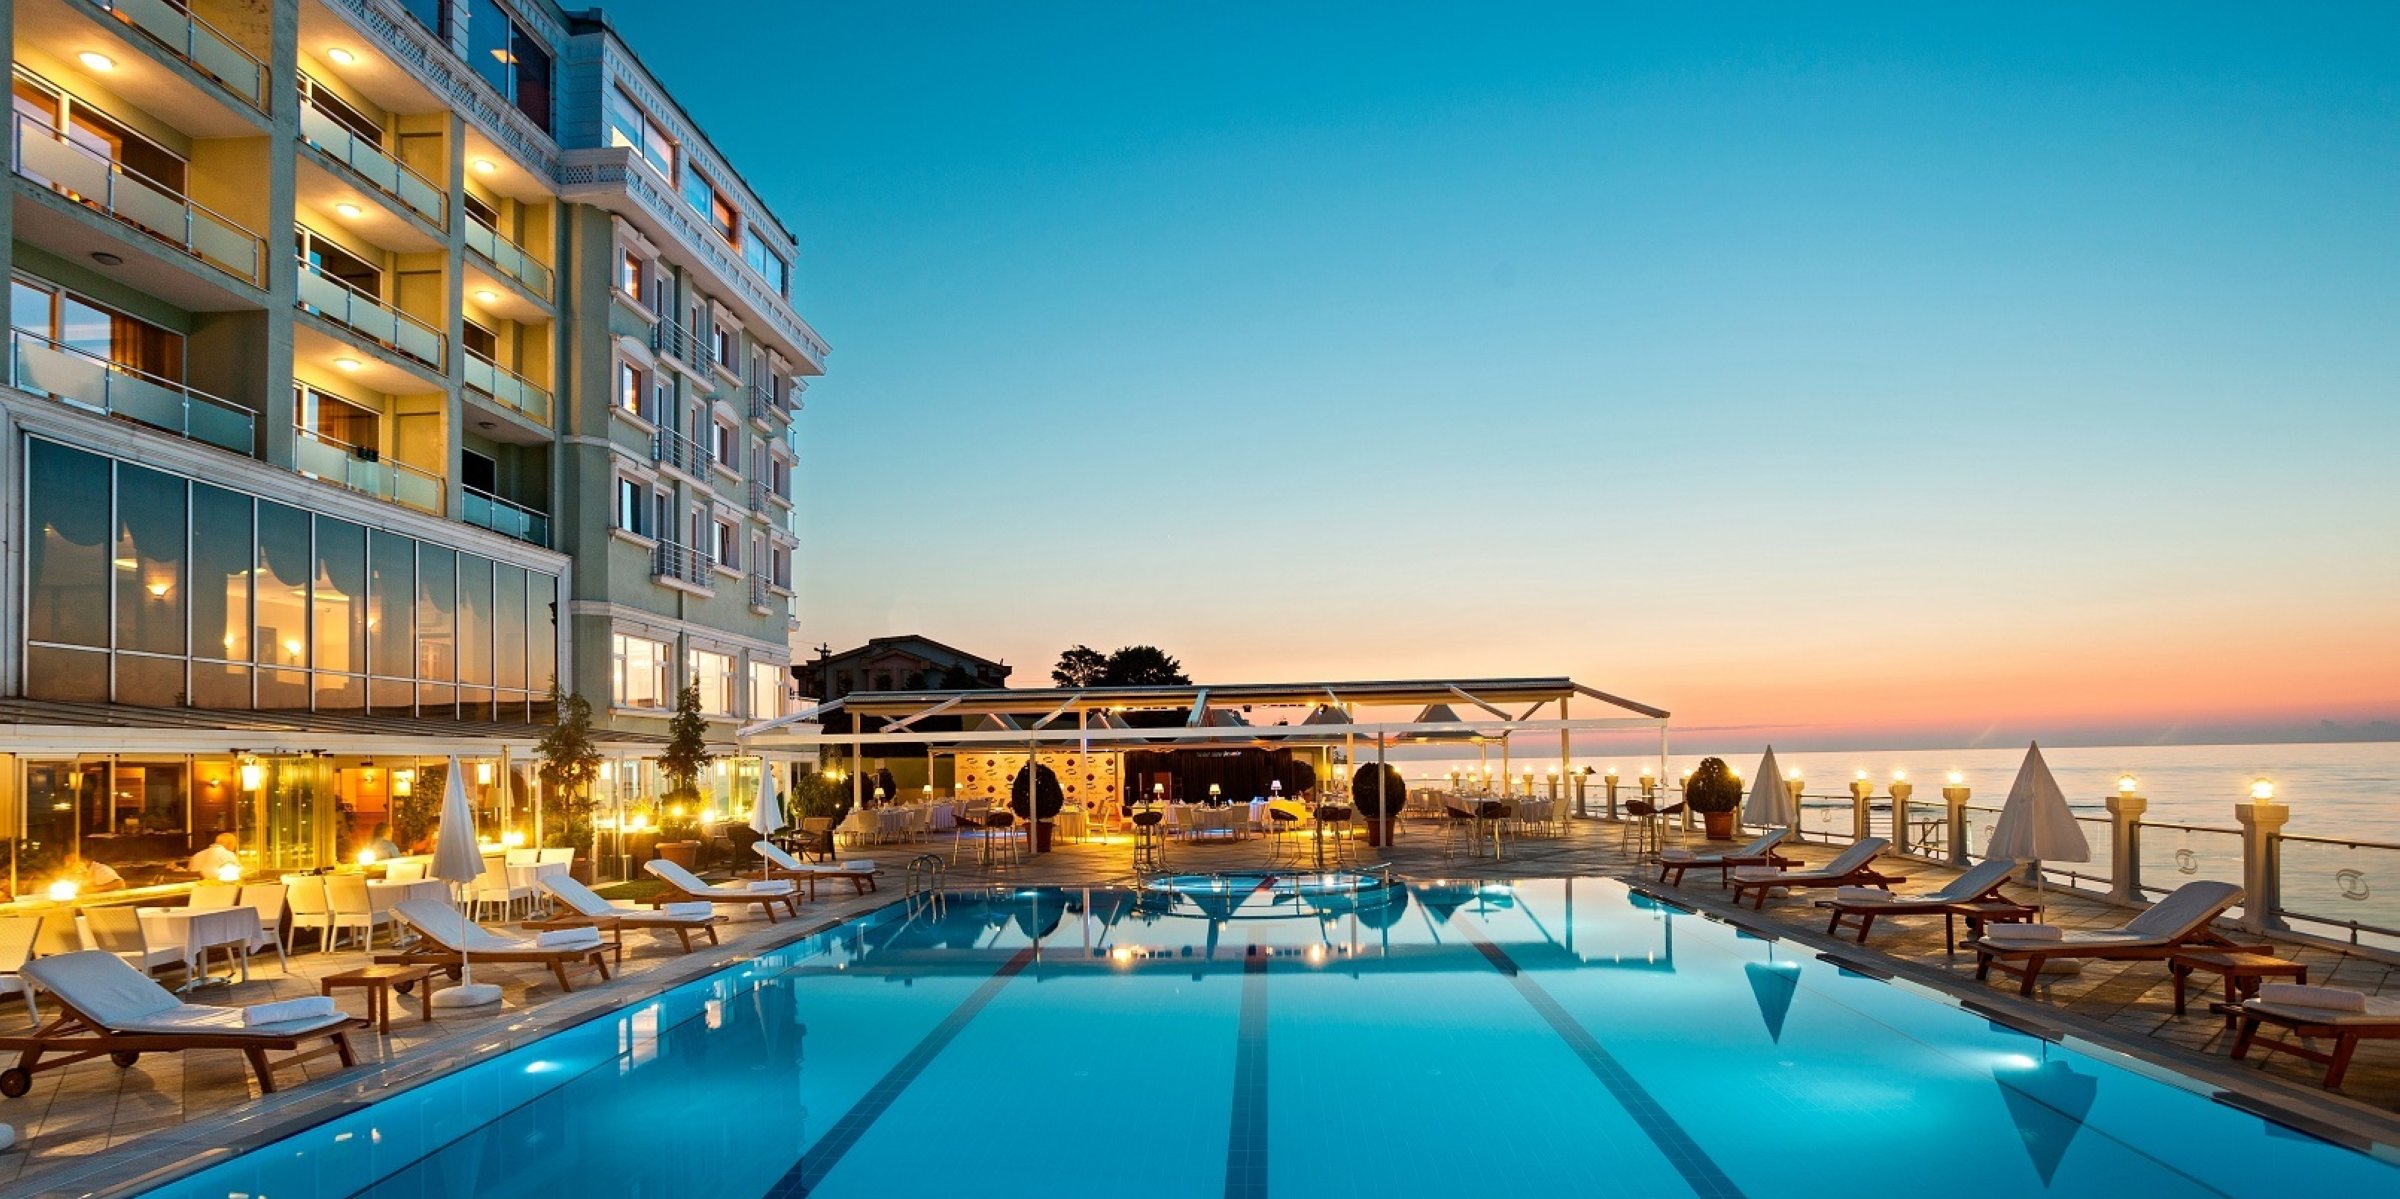 Wyndham to open 2 new luxury hotels in Turkey | Daily Sabah